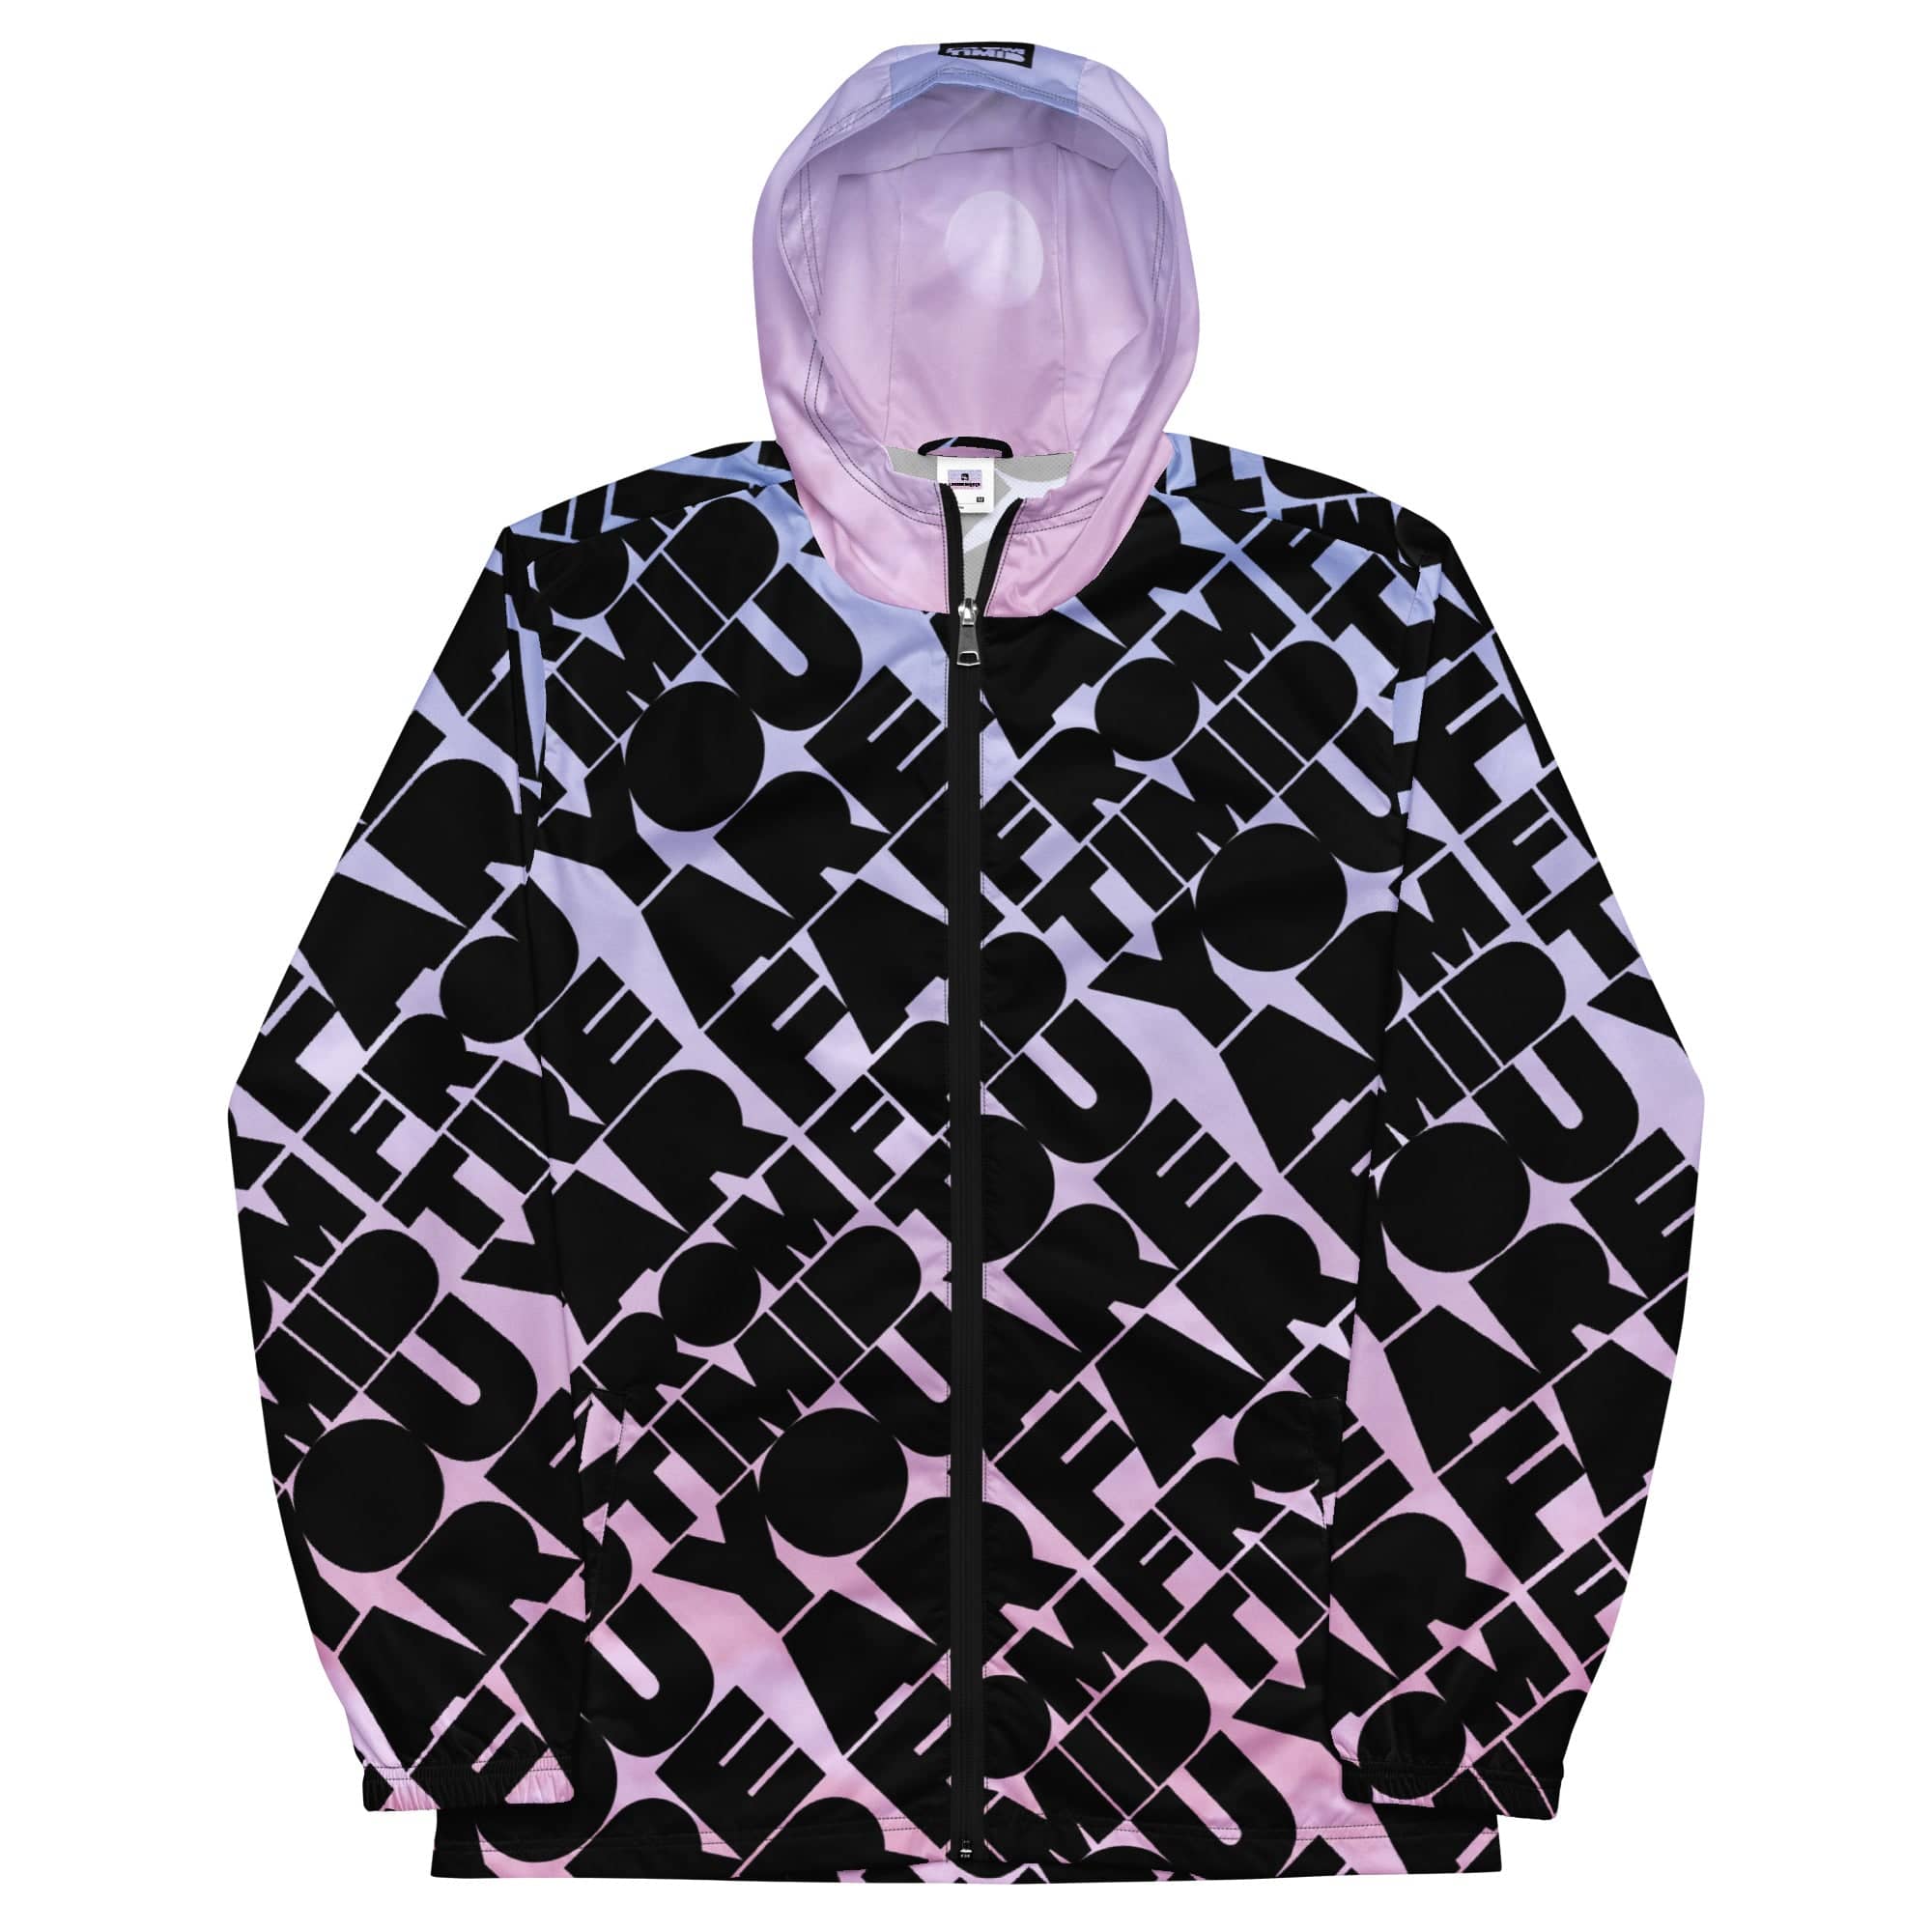 MEN'S YOU ARE FAR FROM TIMID WINDBREAKER - BLACK/WHITE CLOUDS